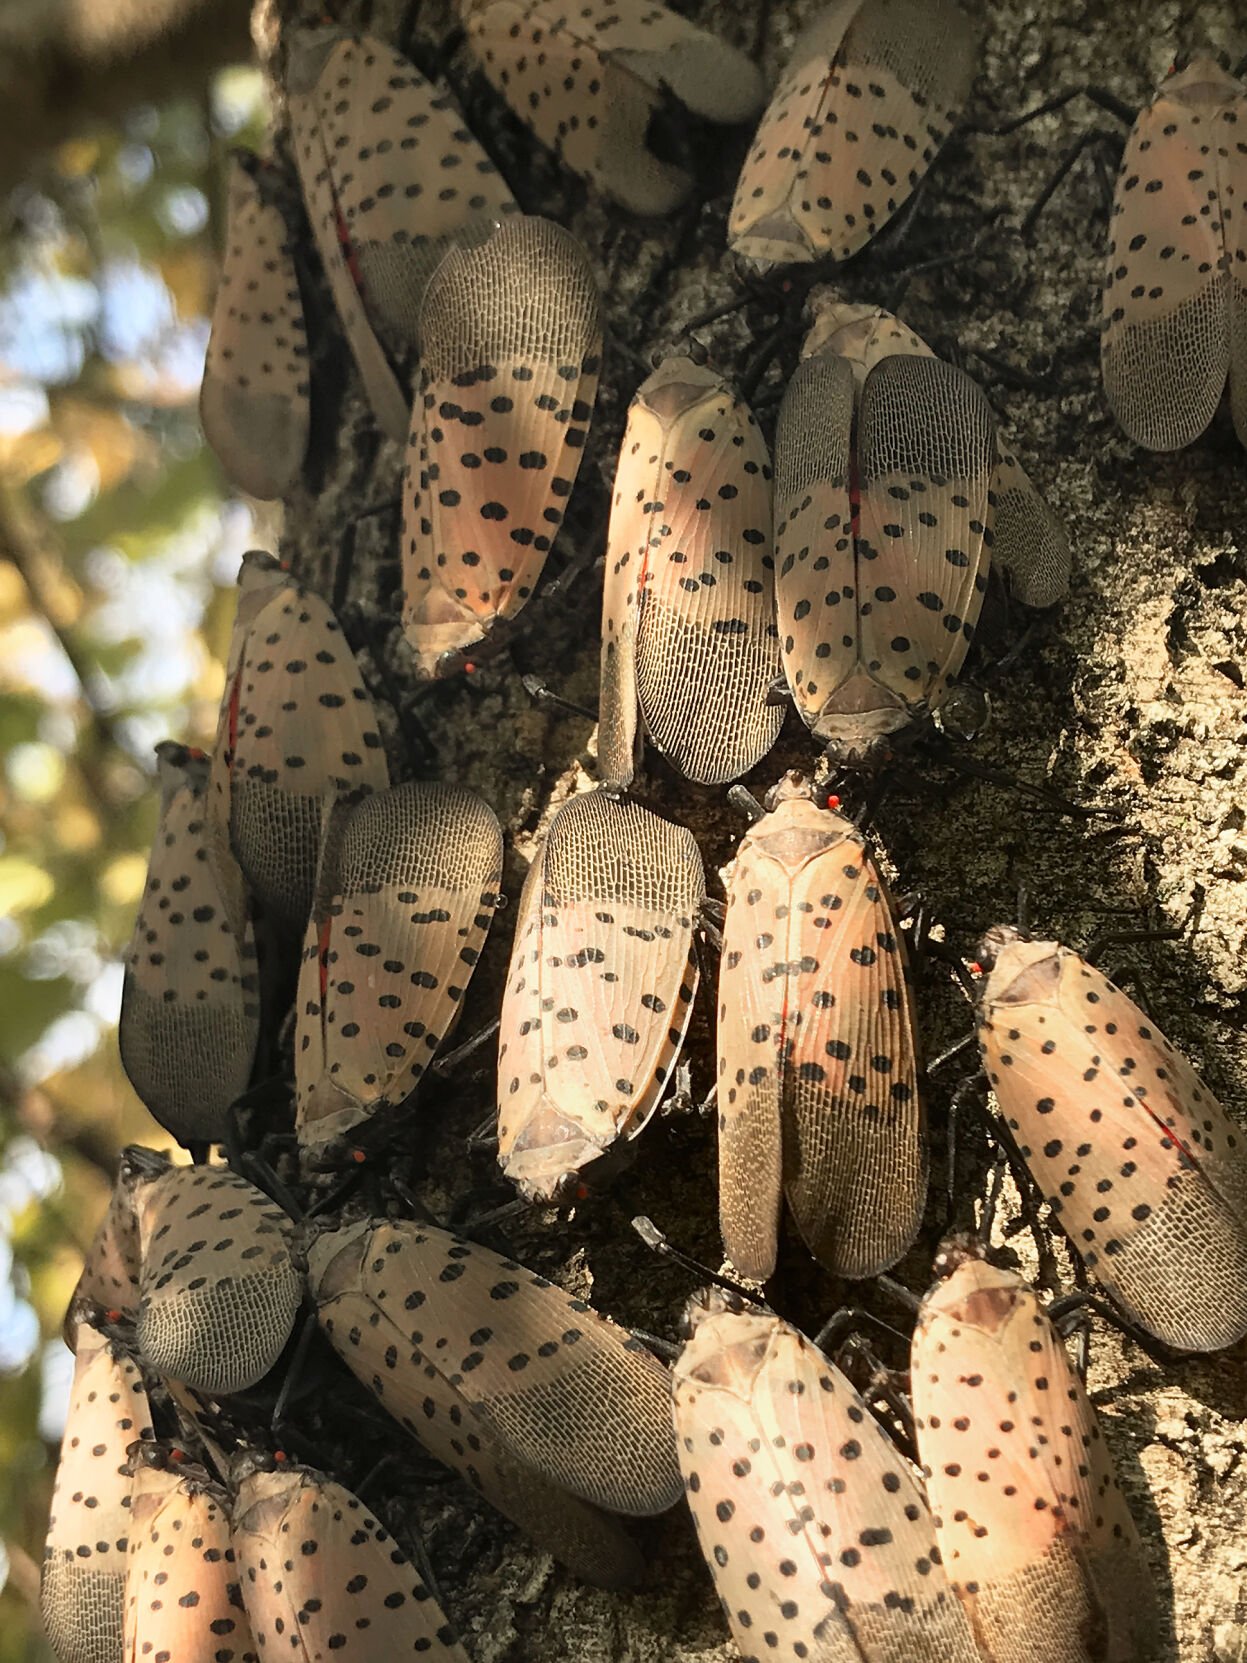 spotted lantern fly eggs